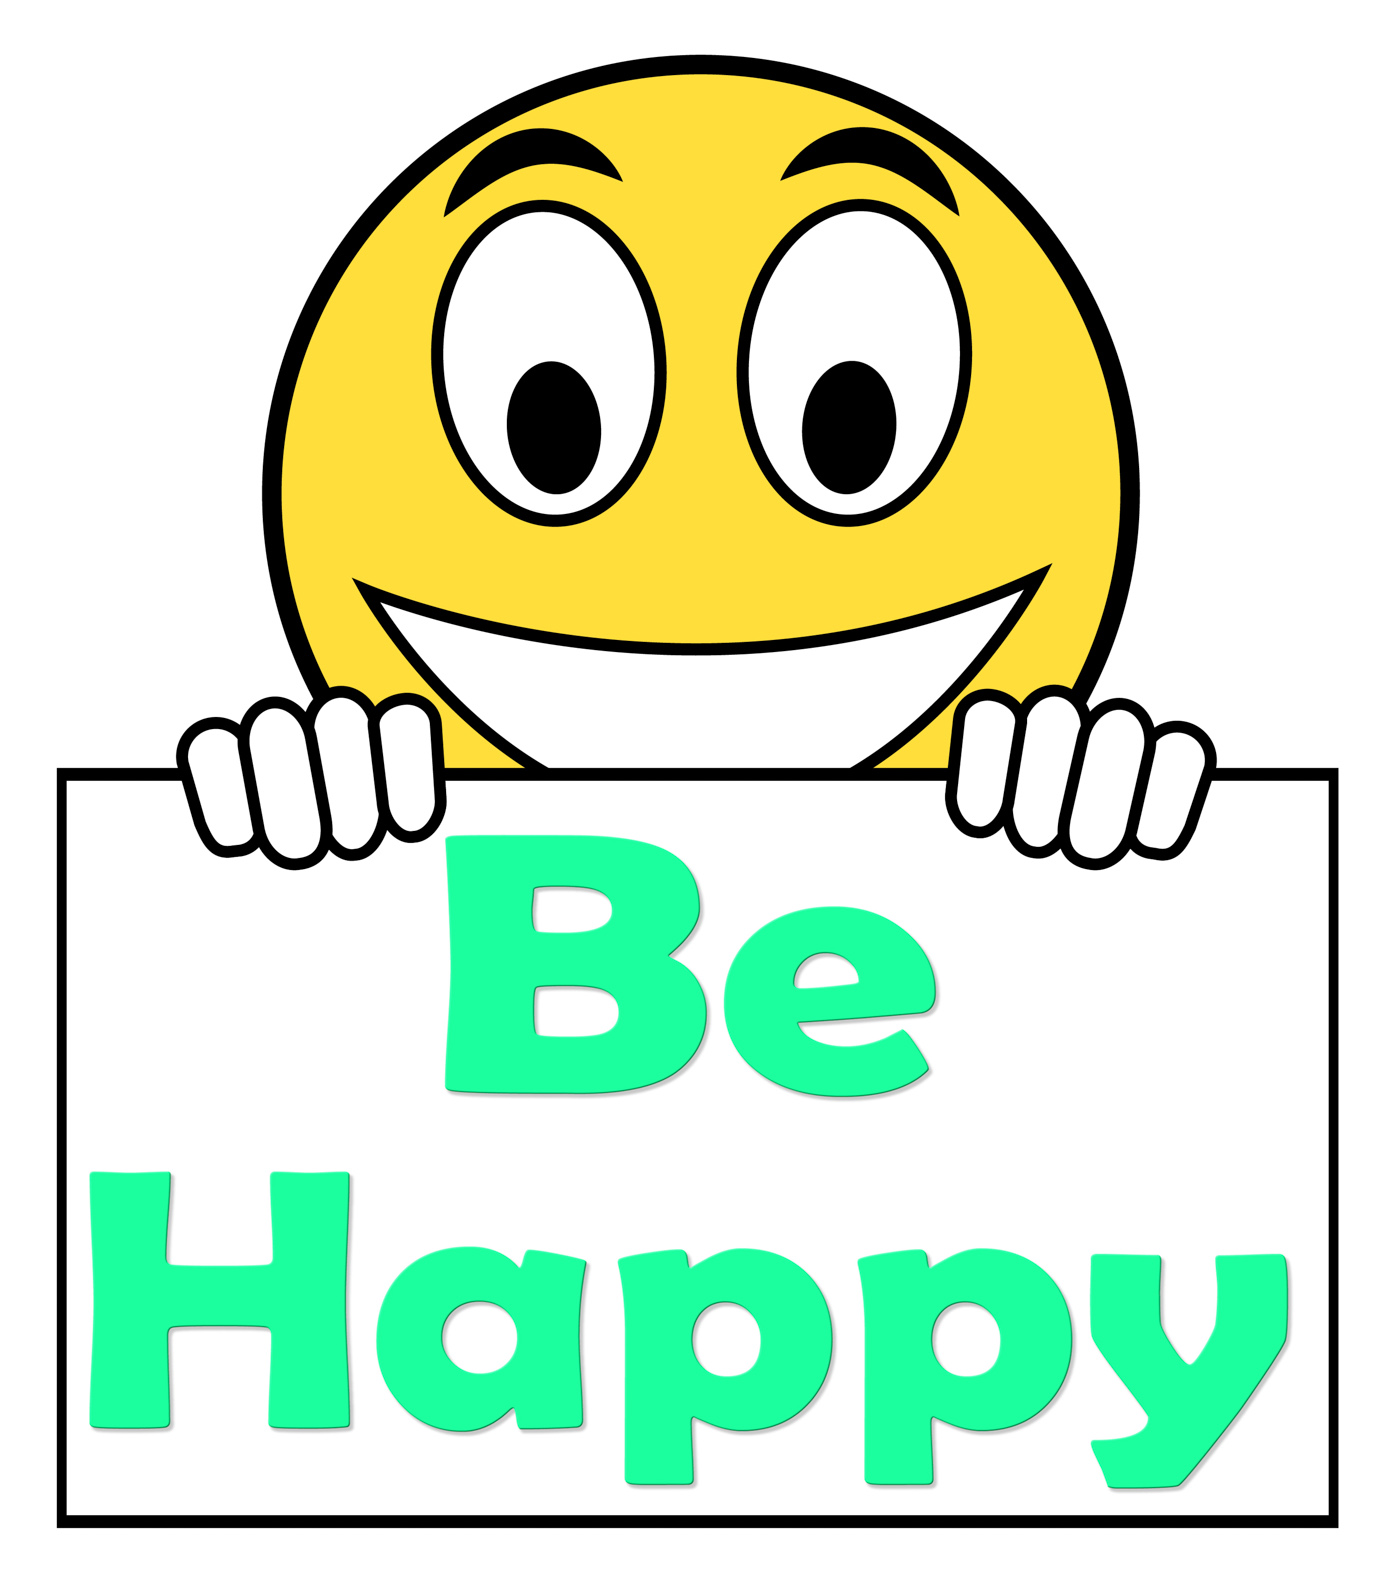 Be happy on sign shows cheerful happiness photo